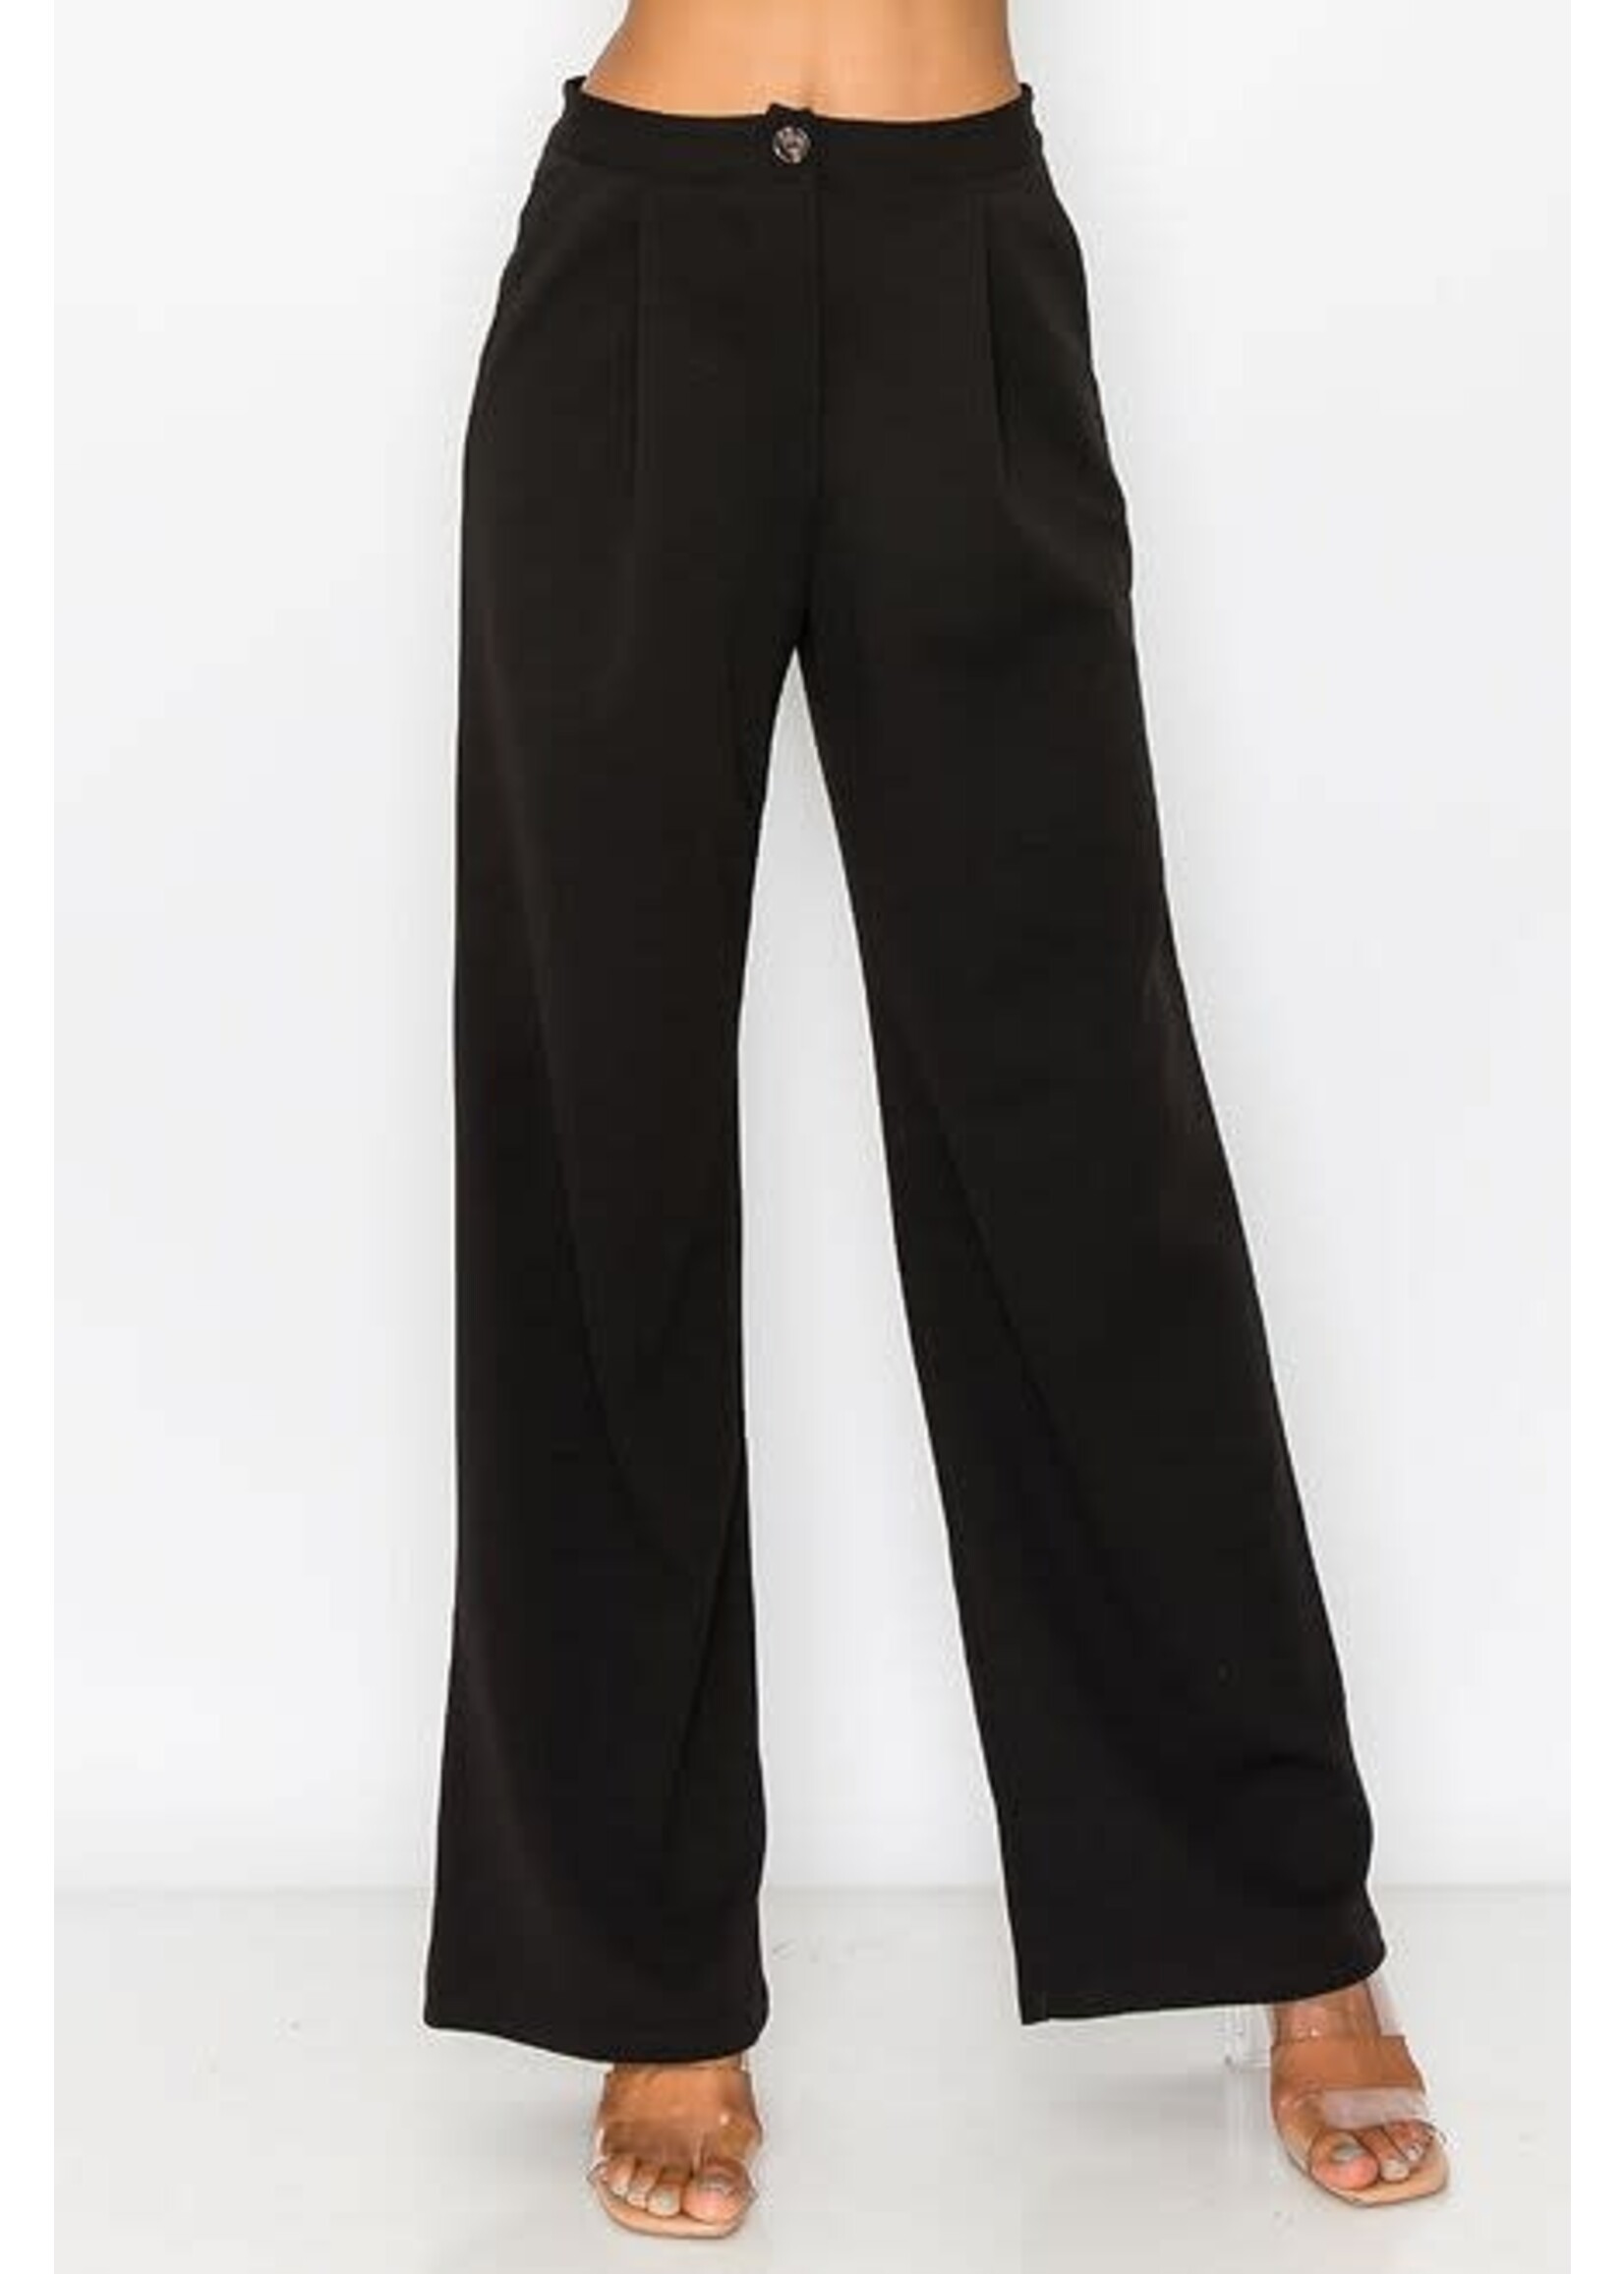 Stylive Solid Pkt Wide Leg Pants